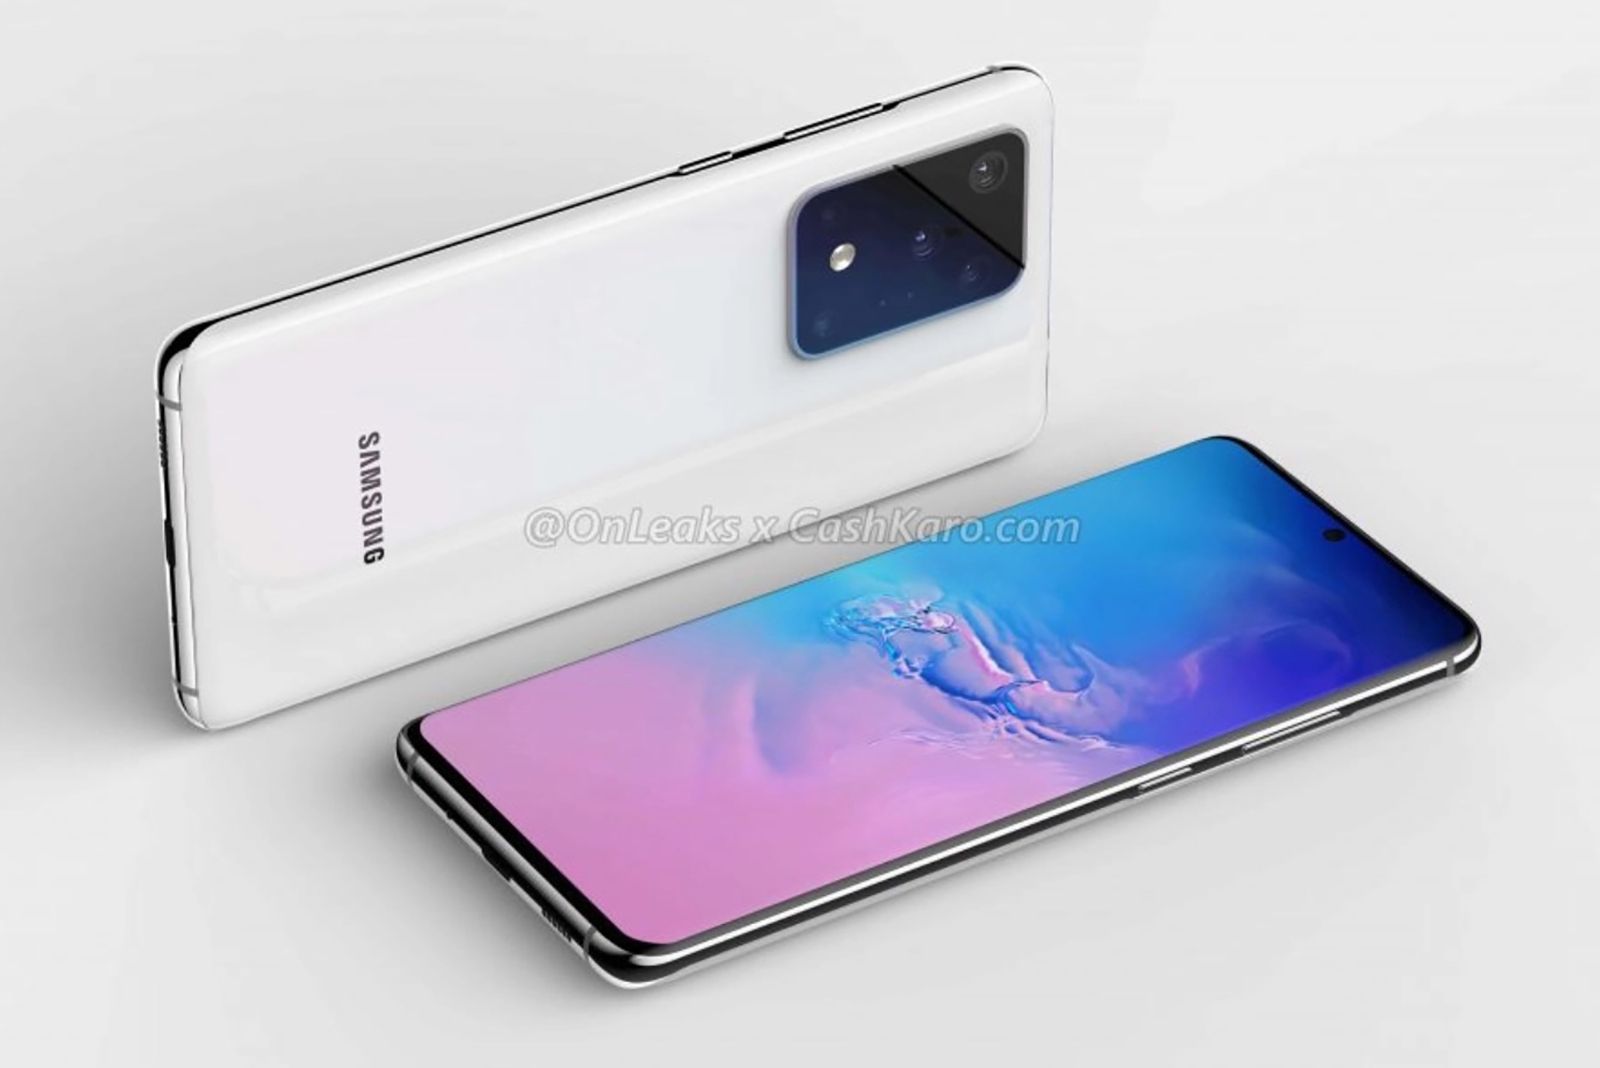 The rear camera on this leaked Galaxy S11 render is um massive to say the least image 2